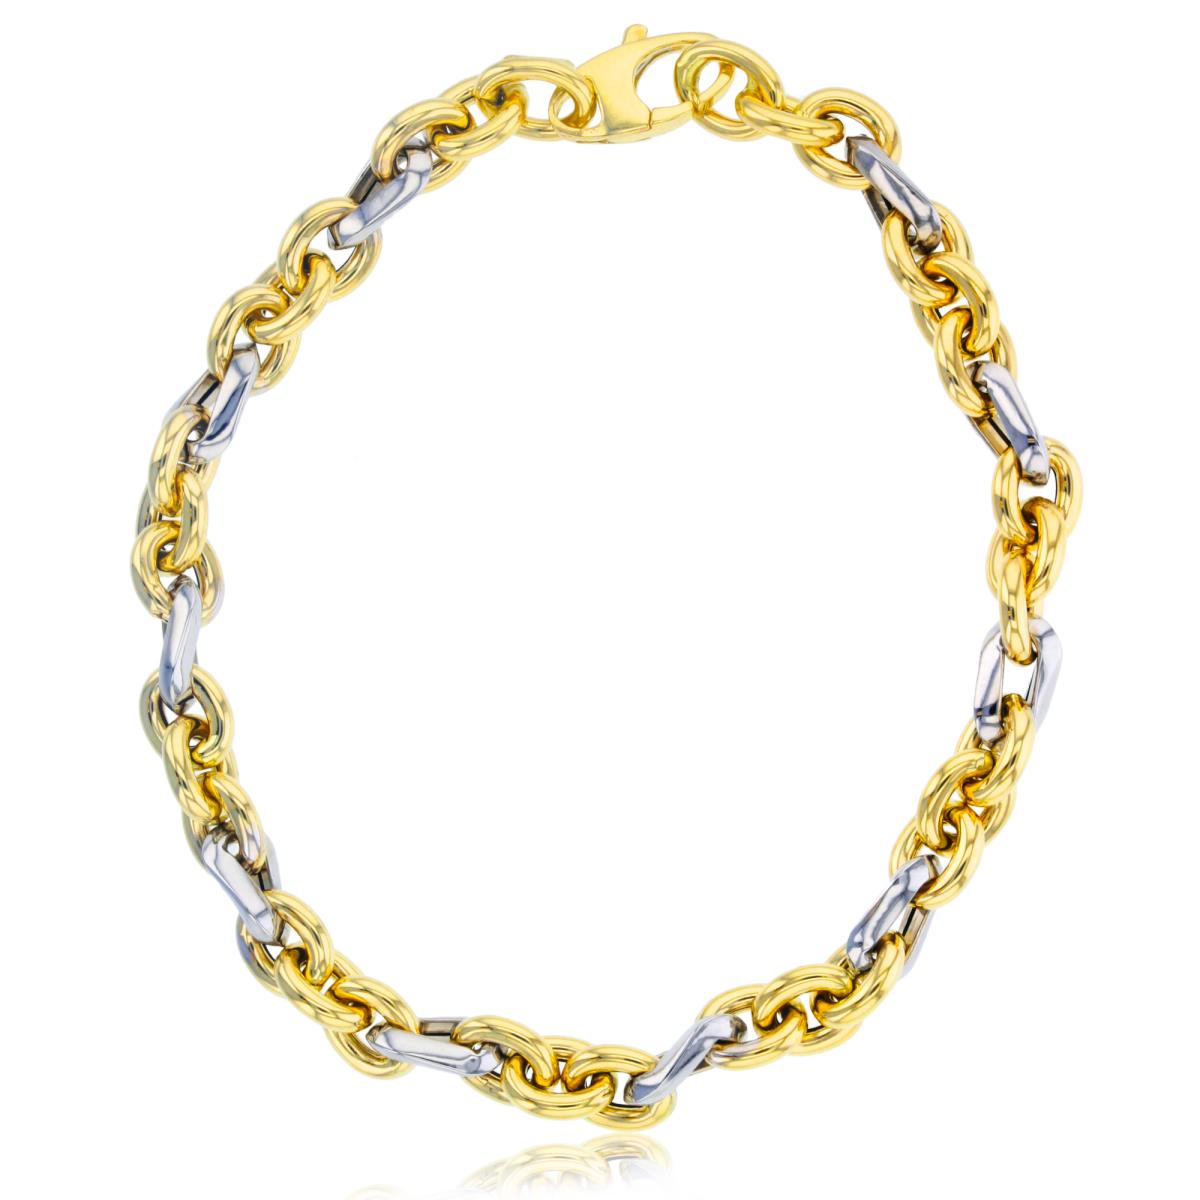 10K Two-Tone Gold Polished Twist Cable 7.75" Chain Bracelet